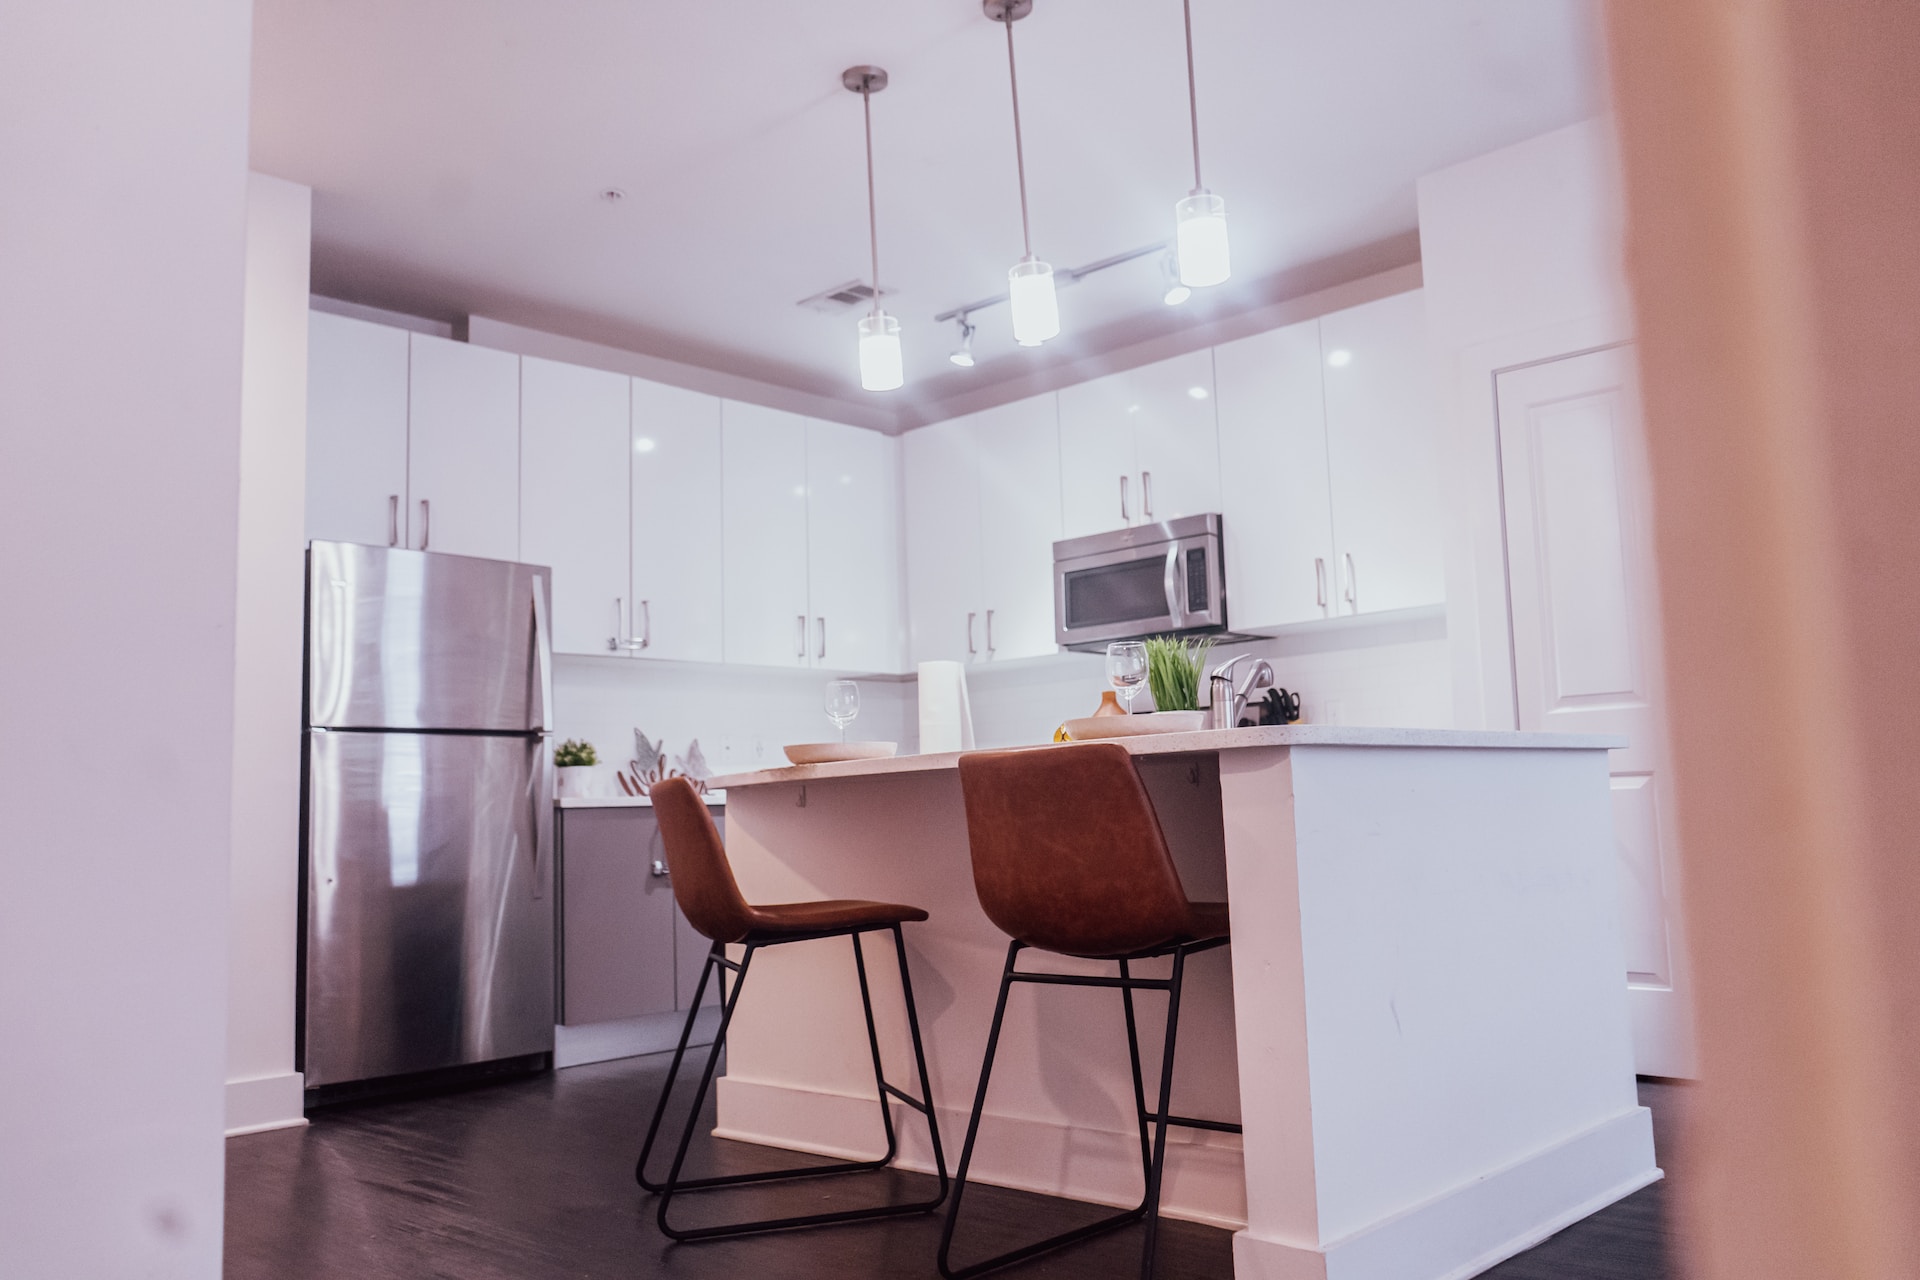 Clean, White Kitchen Cabinets for Your Kitchen Upgrade